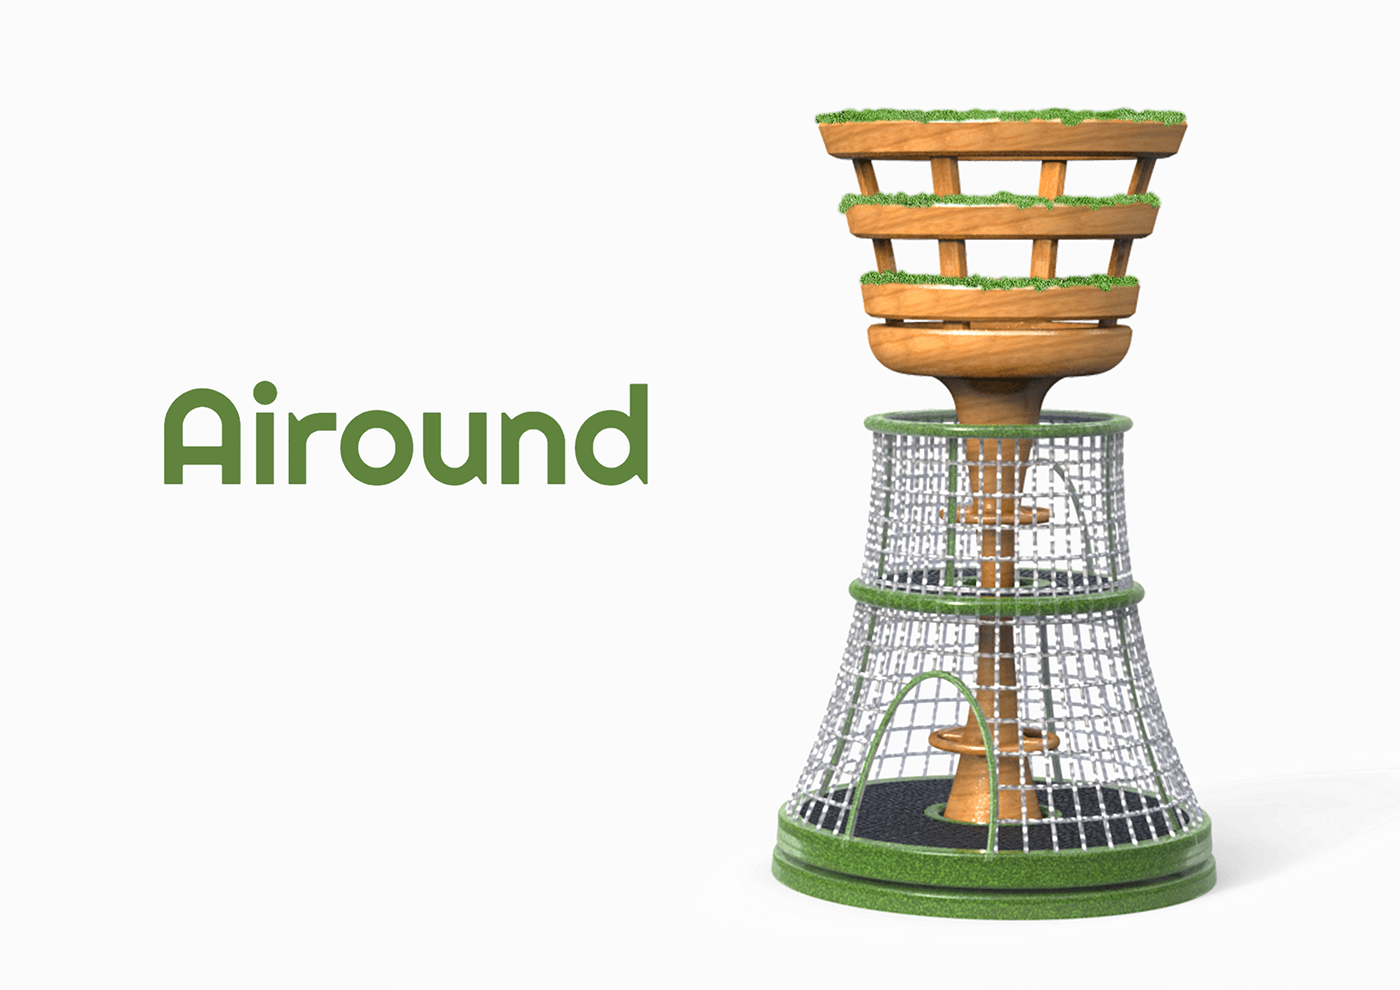 Air convection breathing children kids playground equipment Sustainability Urban City breathable  energy Playground